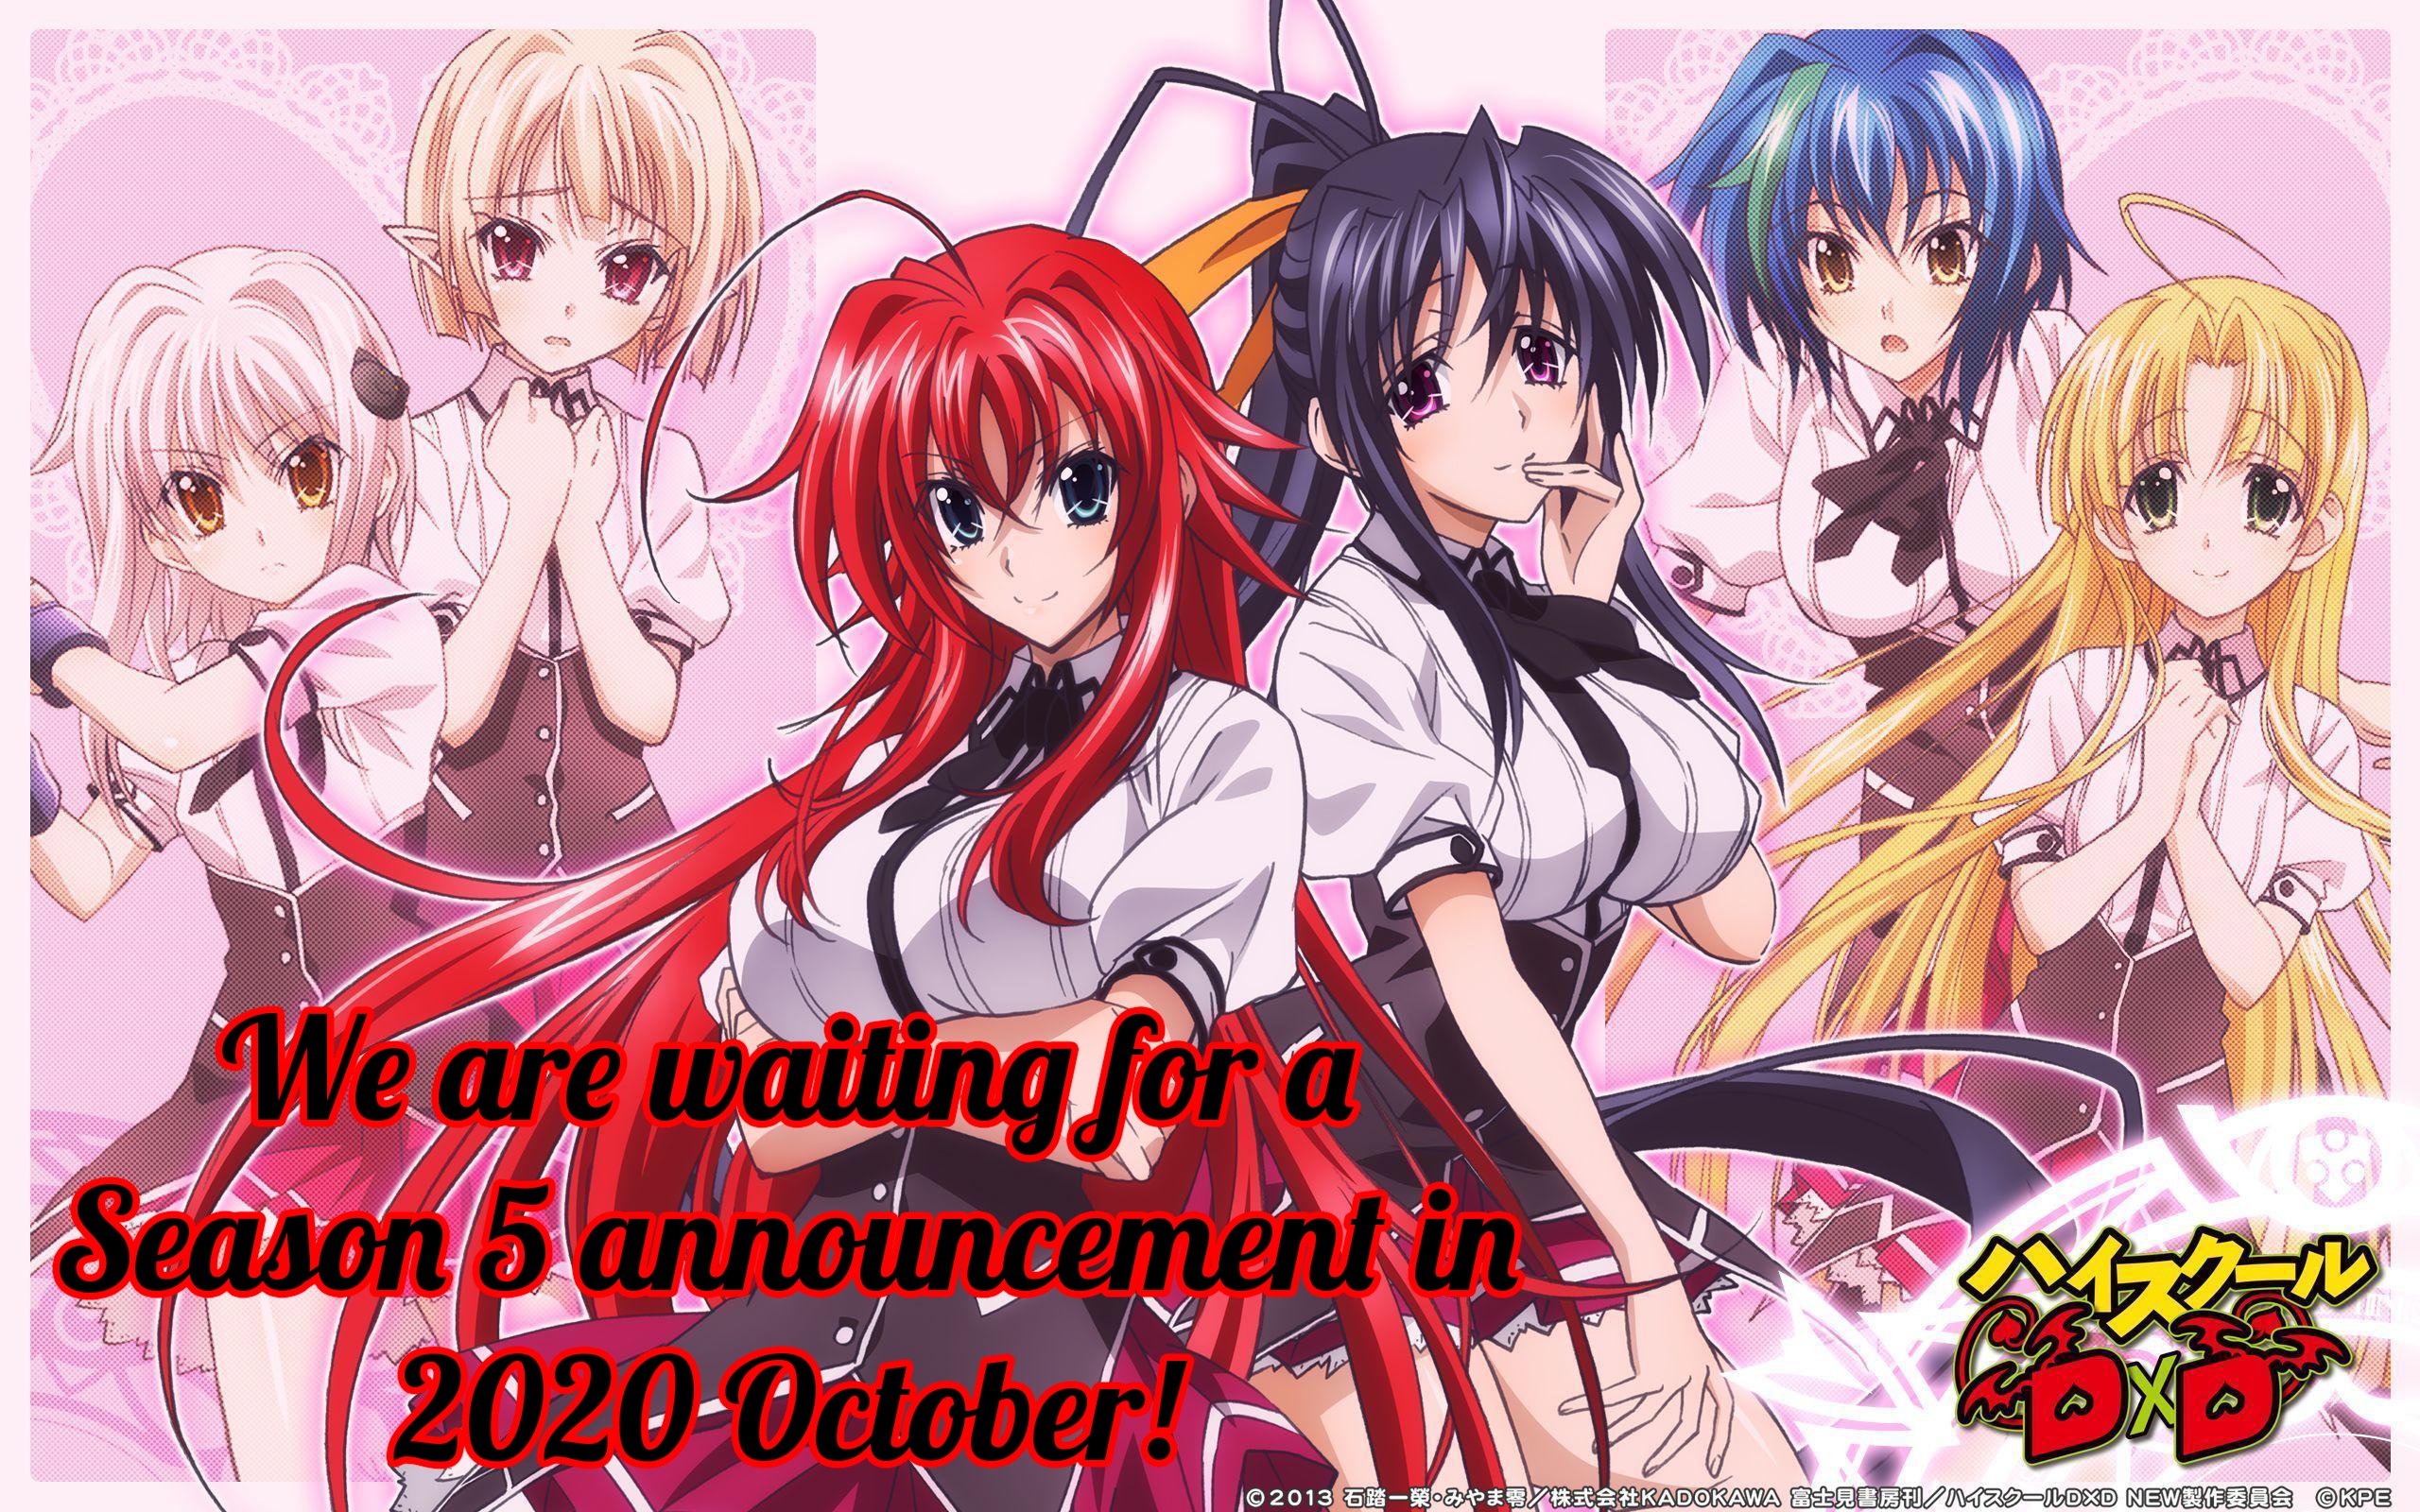 𝑪𝒓𝒊𝒎𝒔𝒐𝒏 𝑻𝒓𝒊𝒖𝒎𝒗𝒊𝒓𝒂𝒕𝒆 𝑹𝑷 on X: @ishibumi_ddd  @office_passione I hope that 2021 will be the year of High School DxD  Season 5!💕 Until it is announced, I made a fan-made poster about Season